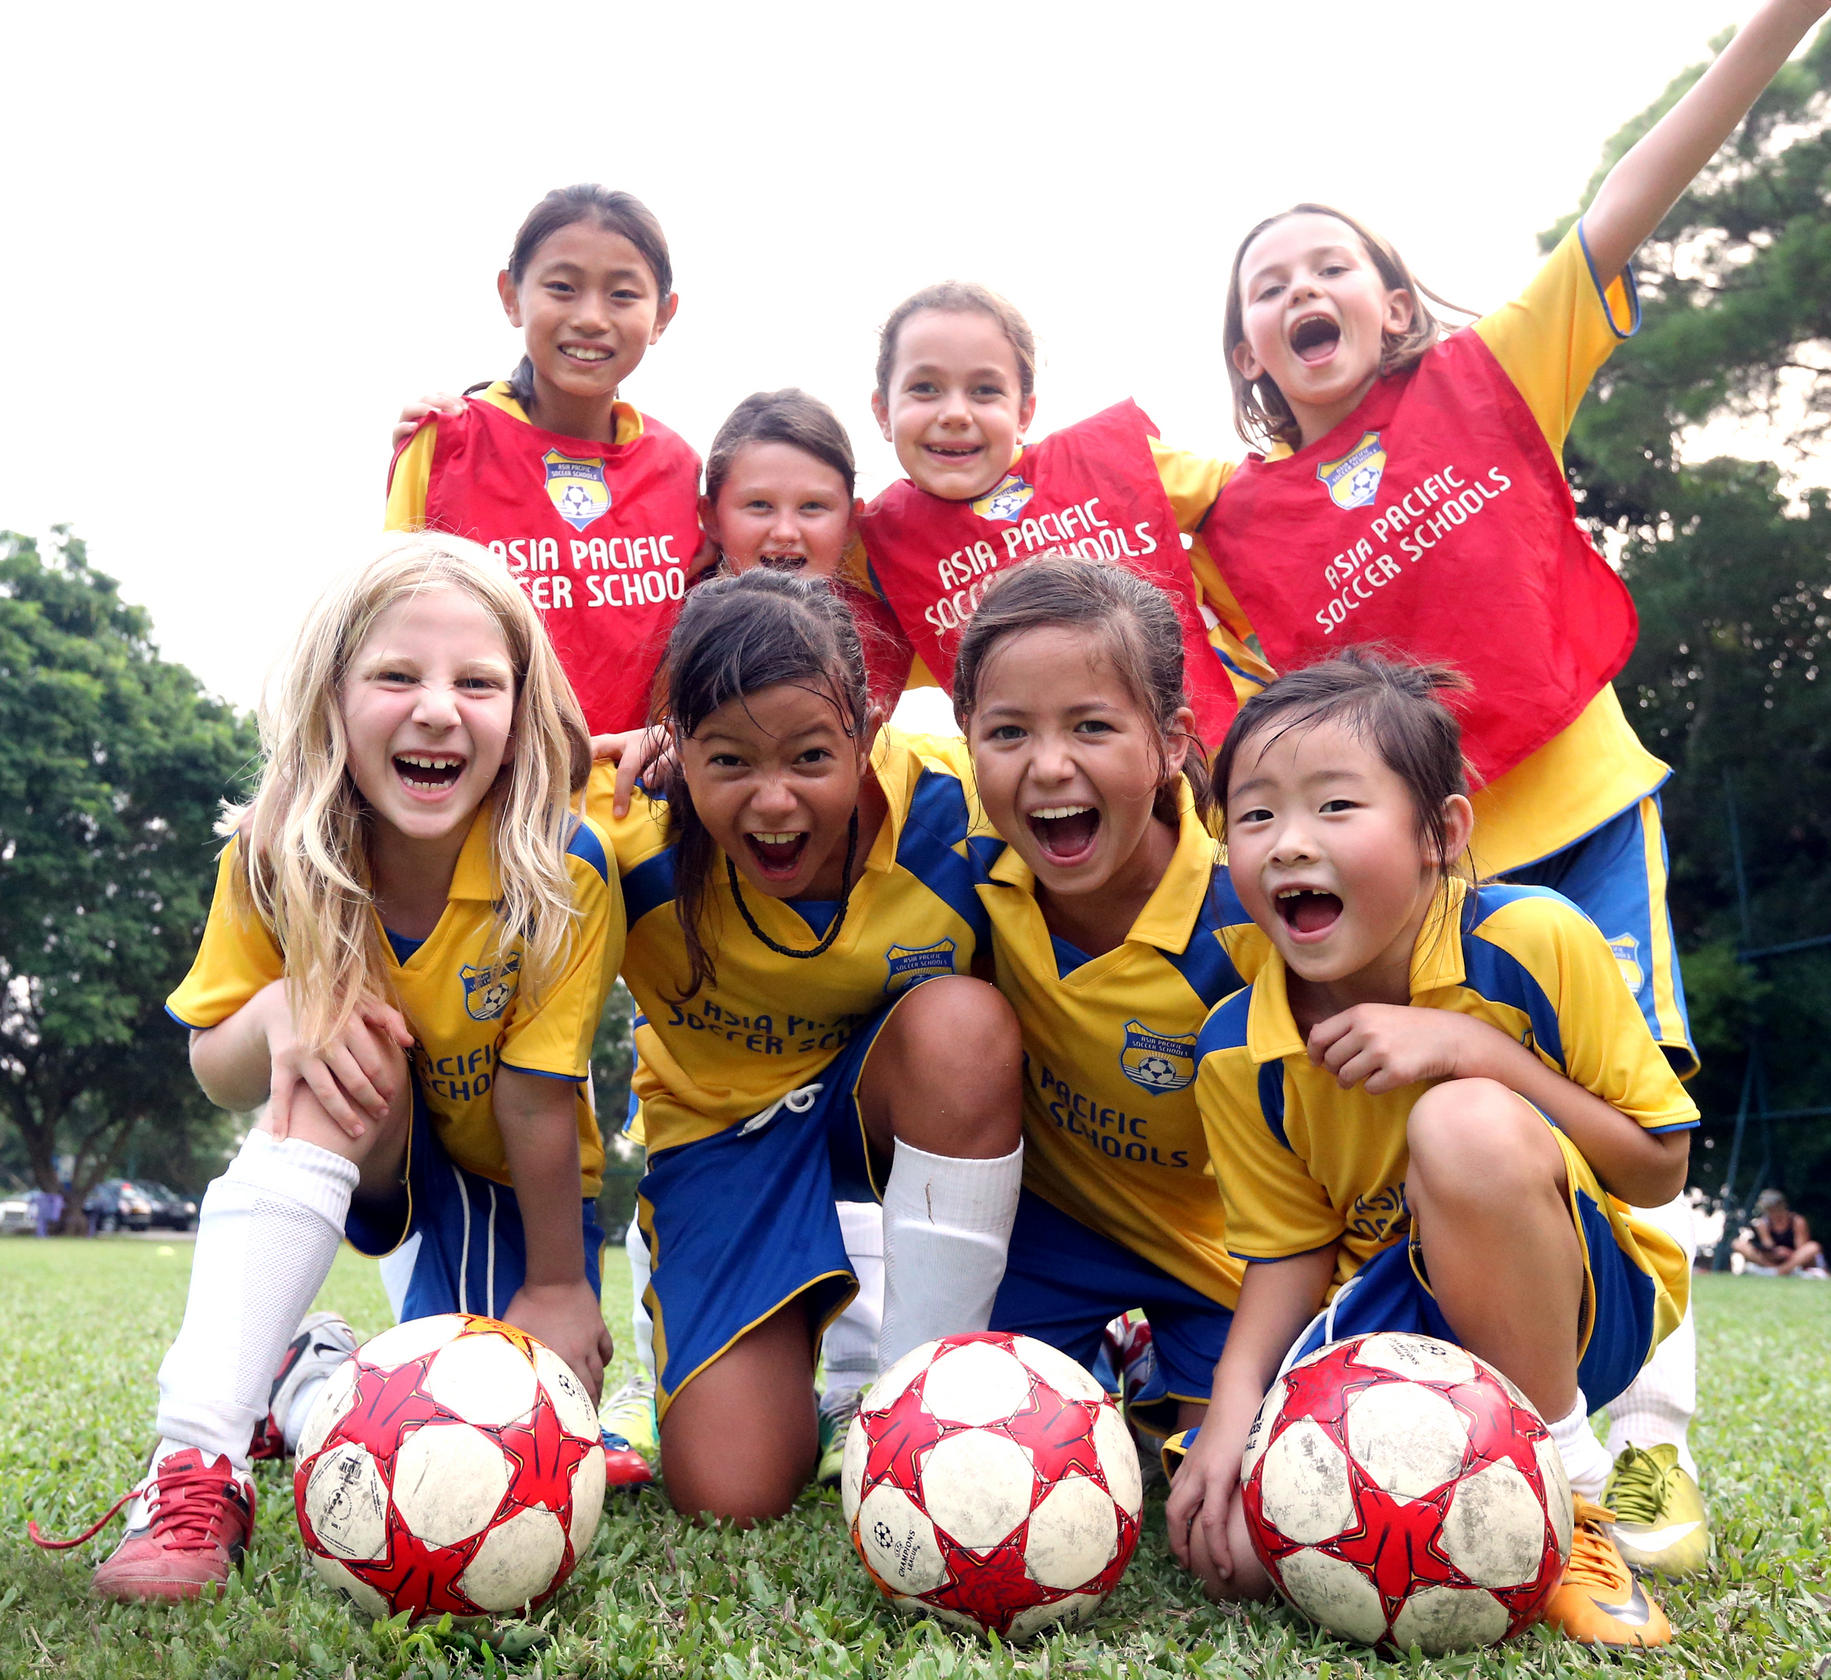 Children's training at Asia Pacific Soccer School. The social aspect of sports can encourage children to get involved. Photo: David Wong